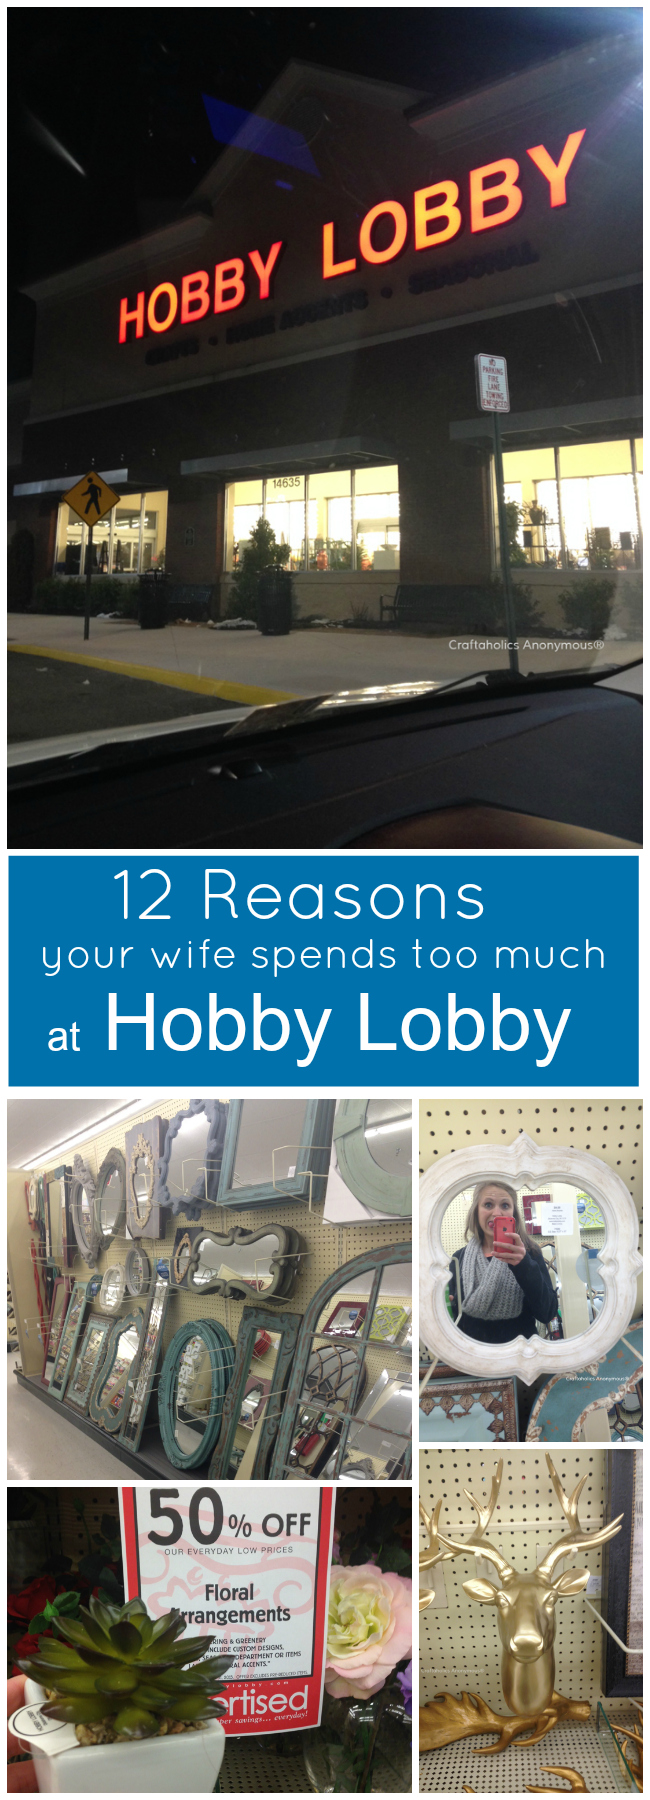 12 reasons your wife spends too much at hobby lobby || Hilarious but so TRUE!